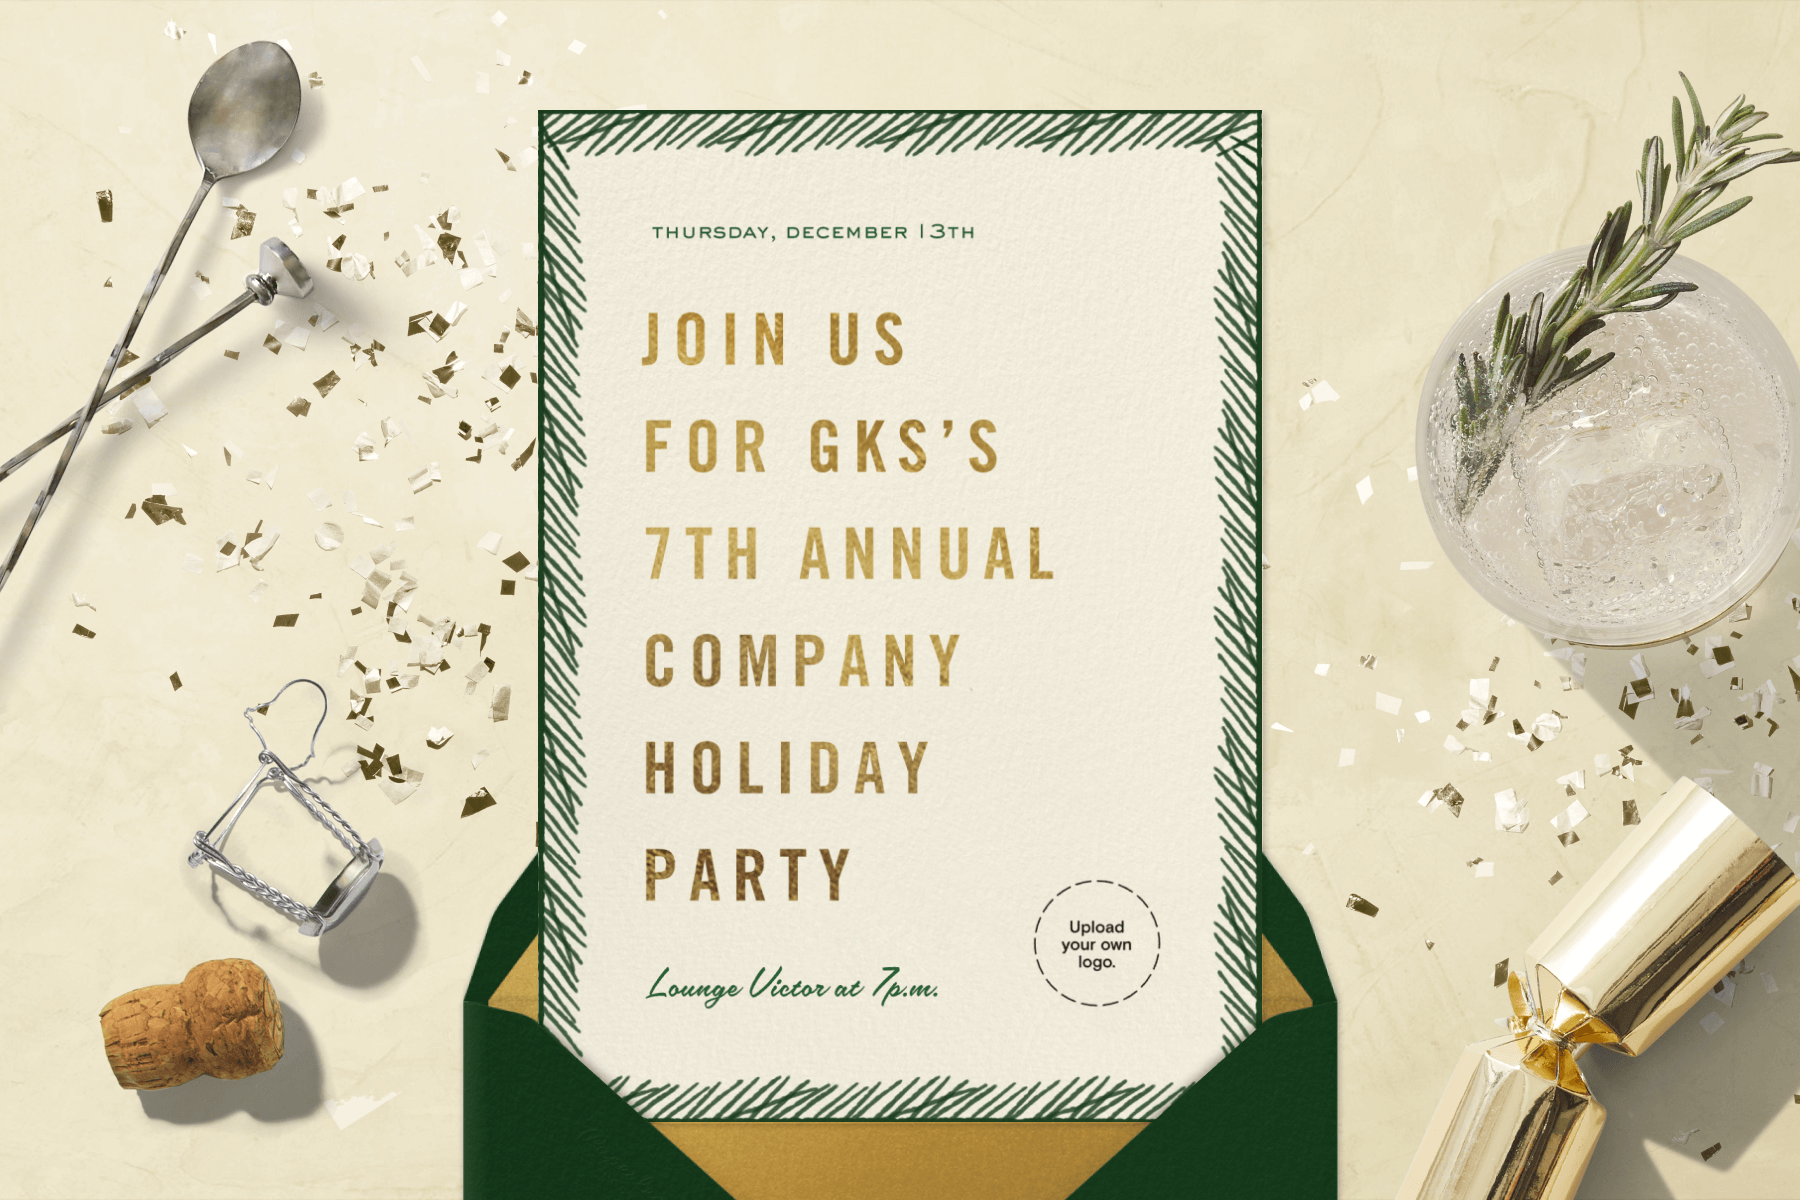 A beige holiday party invitation with a green fringe border, surrounded by holiday themed props like a cocktail and a party cracker.